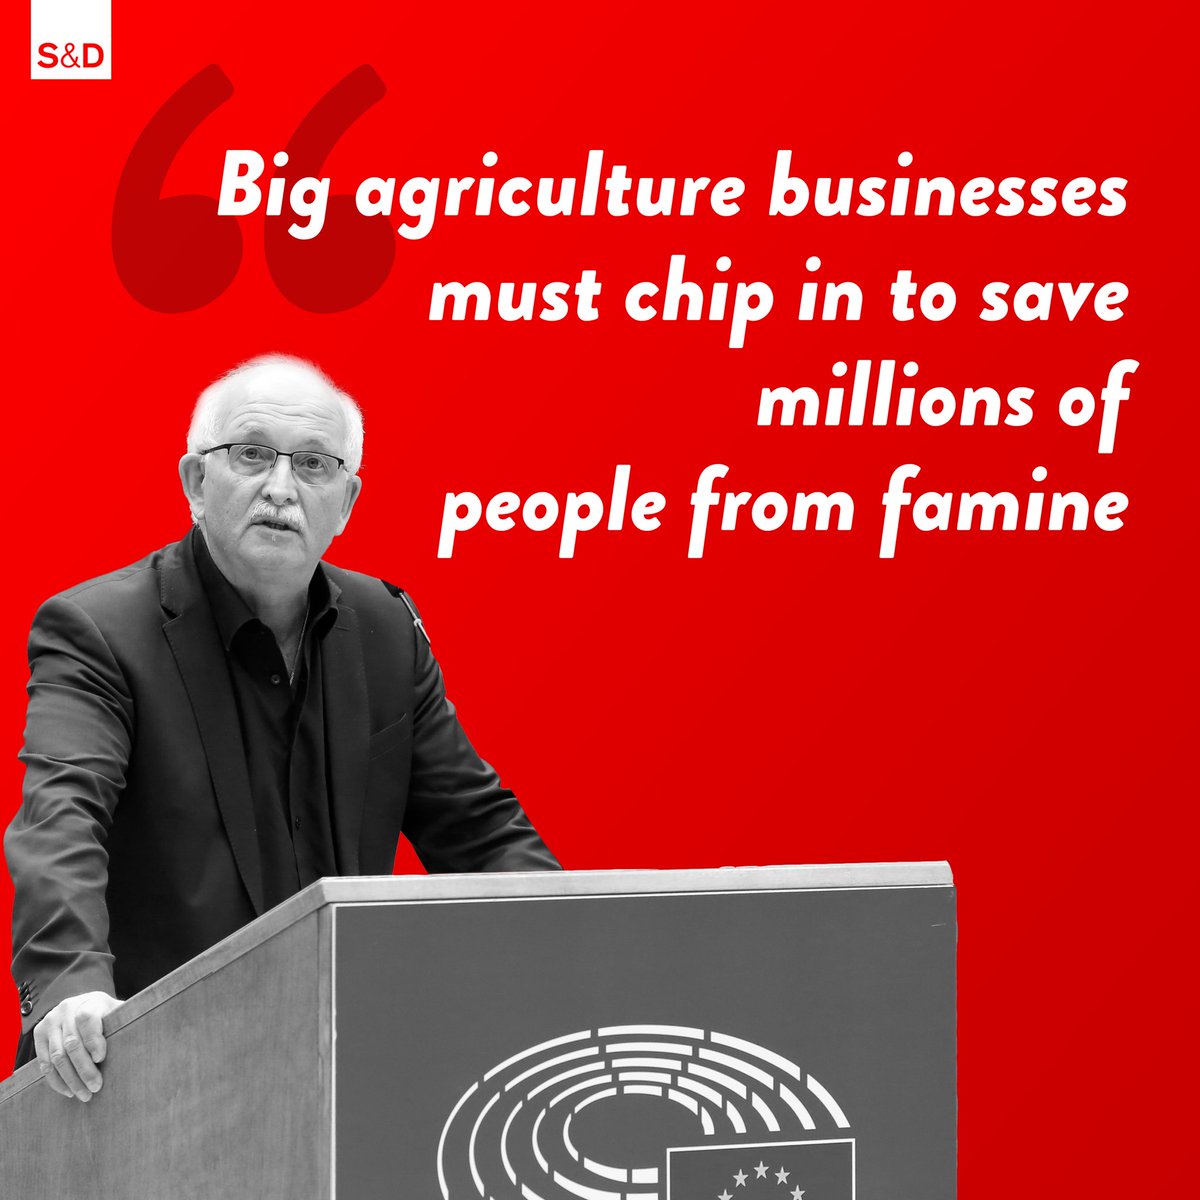 Over 340 million people are at risk of acute famine. Behind these numbers are human lives. People don’t have to die. This earth has enough for everyone. We must act and redirect the extra profits of the big agroindustrial businesses and make agriculture sustainable. @UdoBullmann